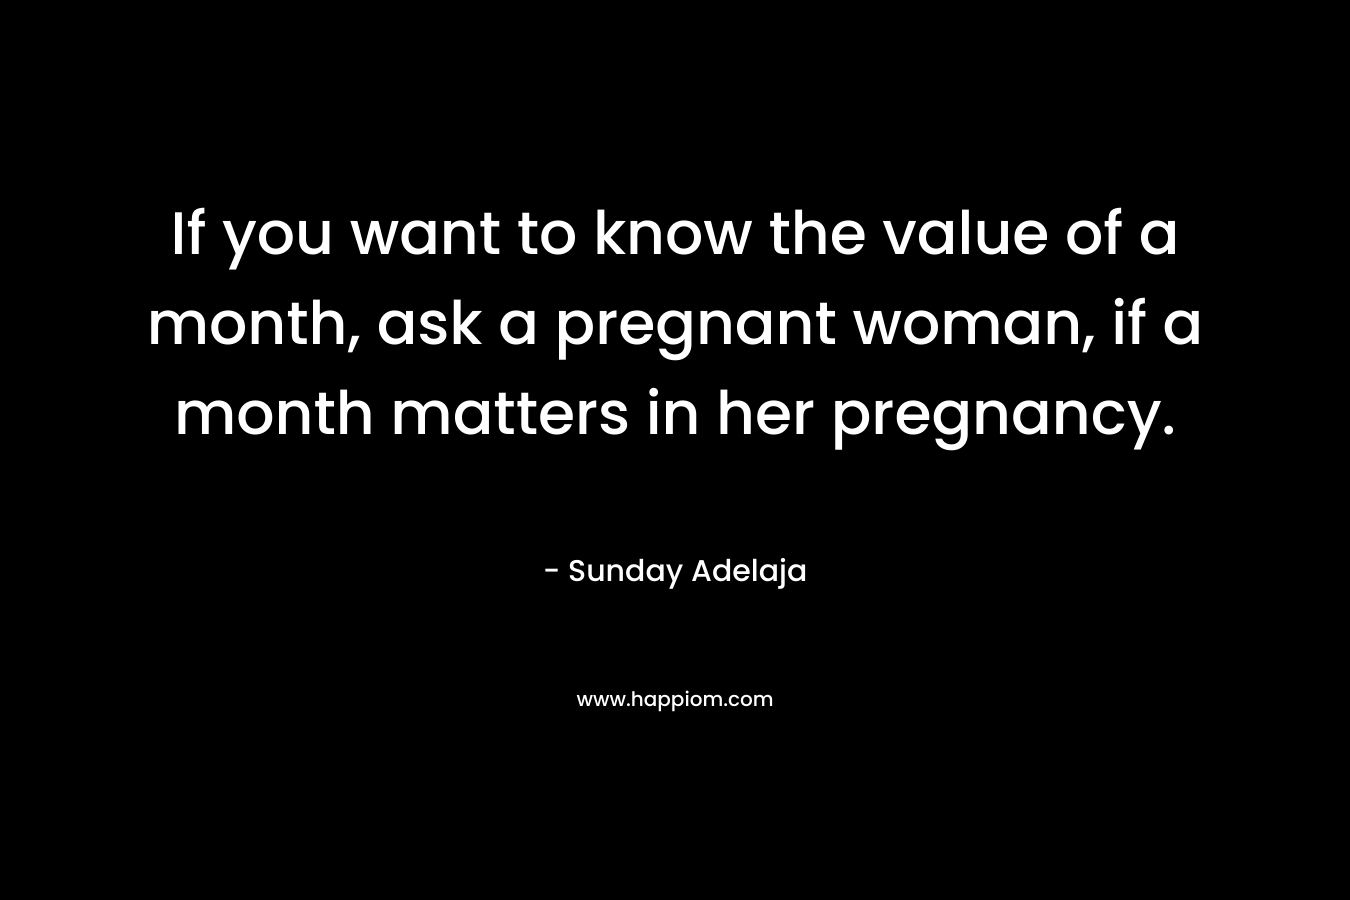 If you want to know the value of a month, ask a pregnant woman, if a month matters in her pregnancy.